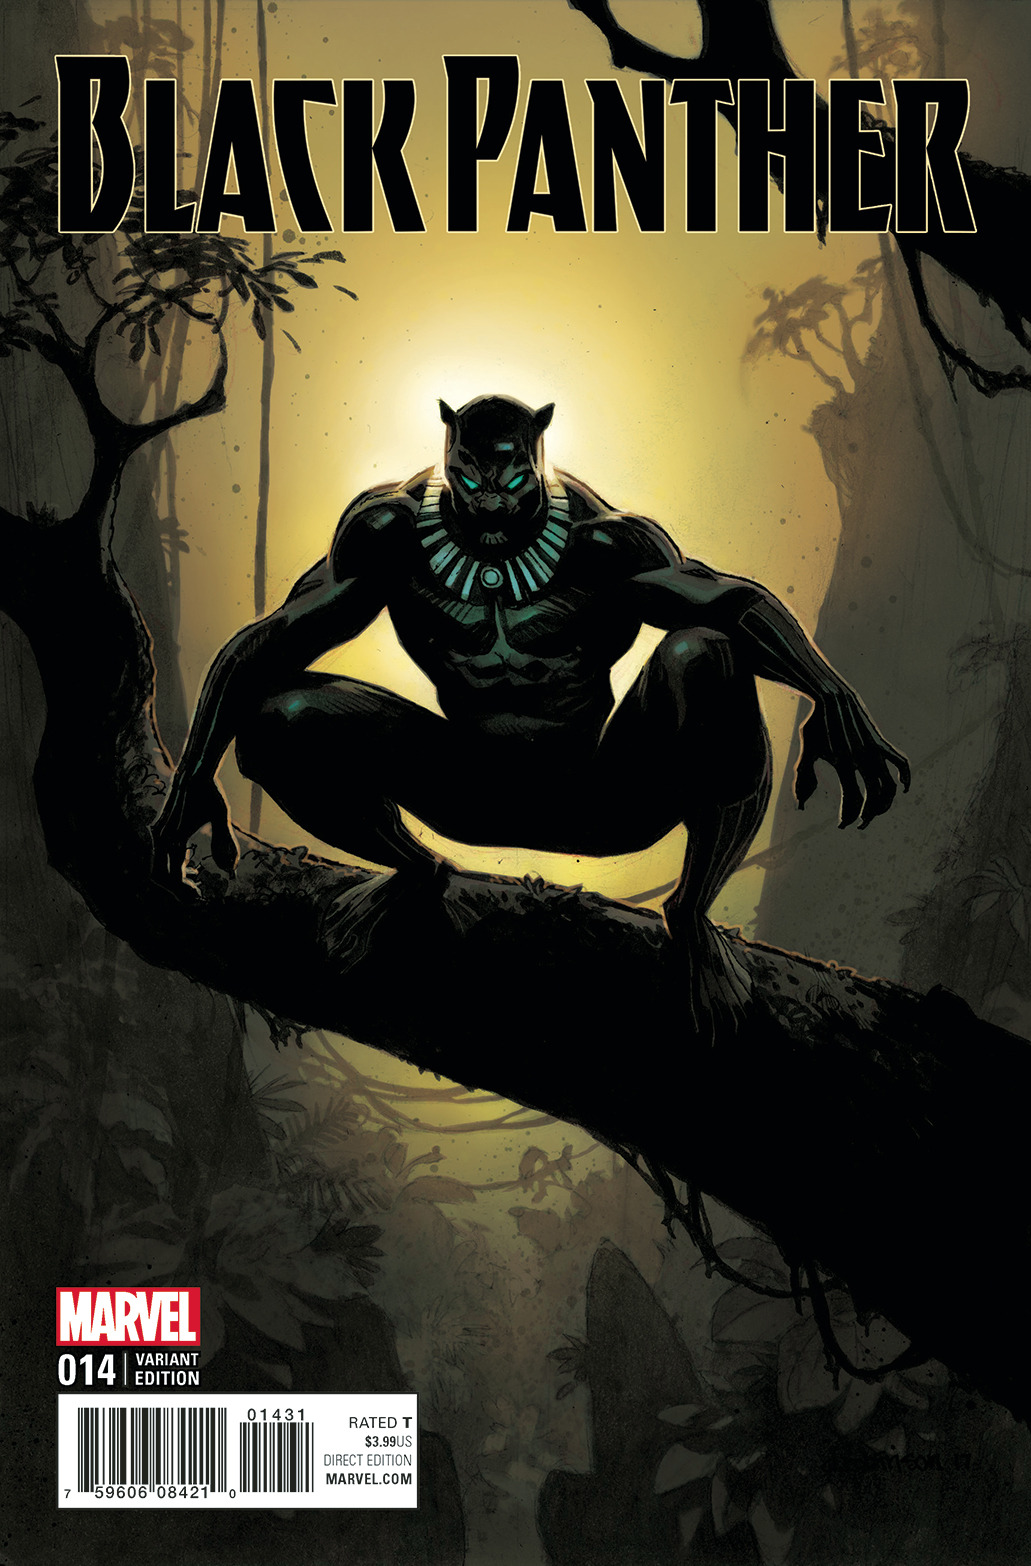 Black Panther #14 (2016) Robinson 1 for 25 Incentive Variant